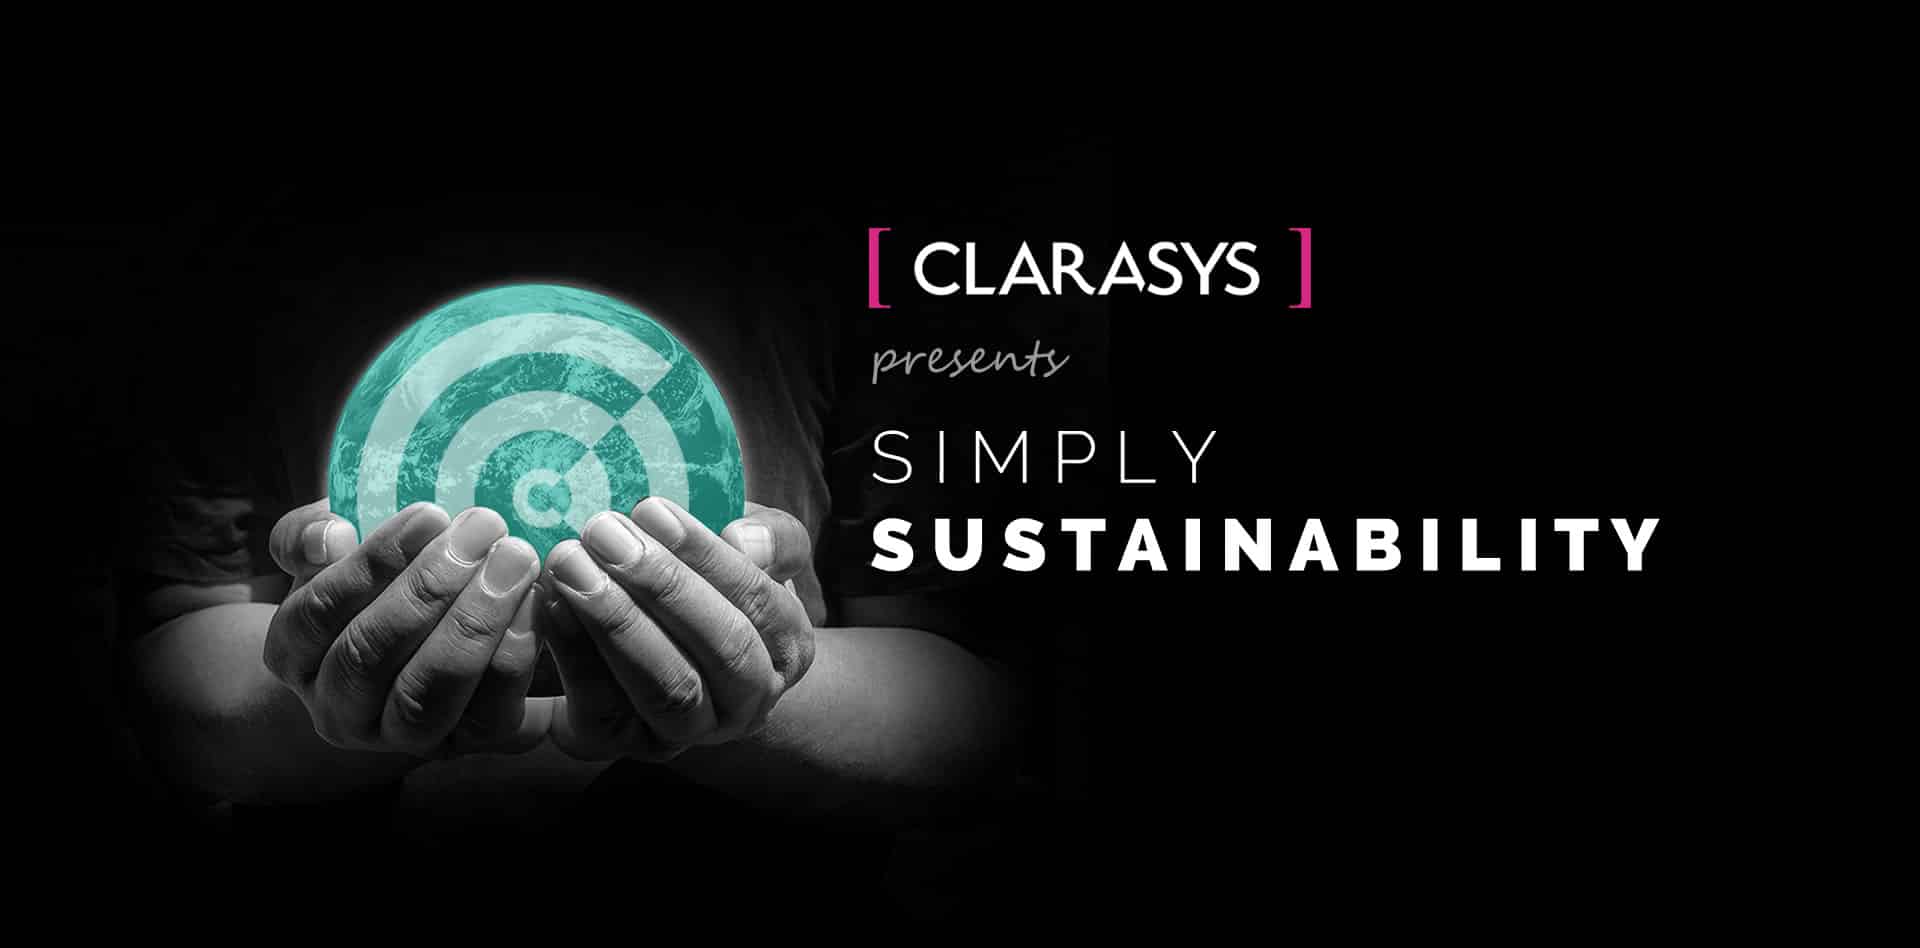 Clarasys-presents-Simply-Sustainability-podcast-featured-image-Clarasys